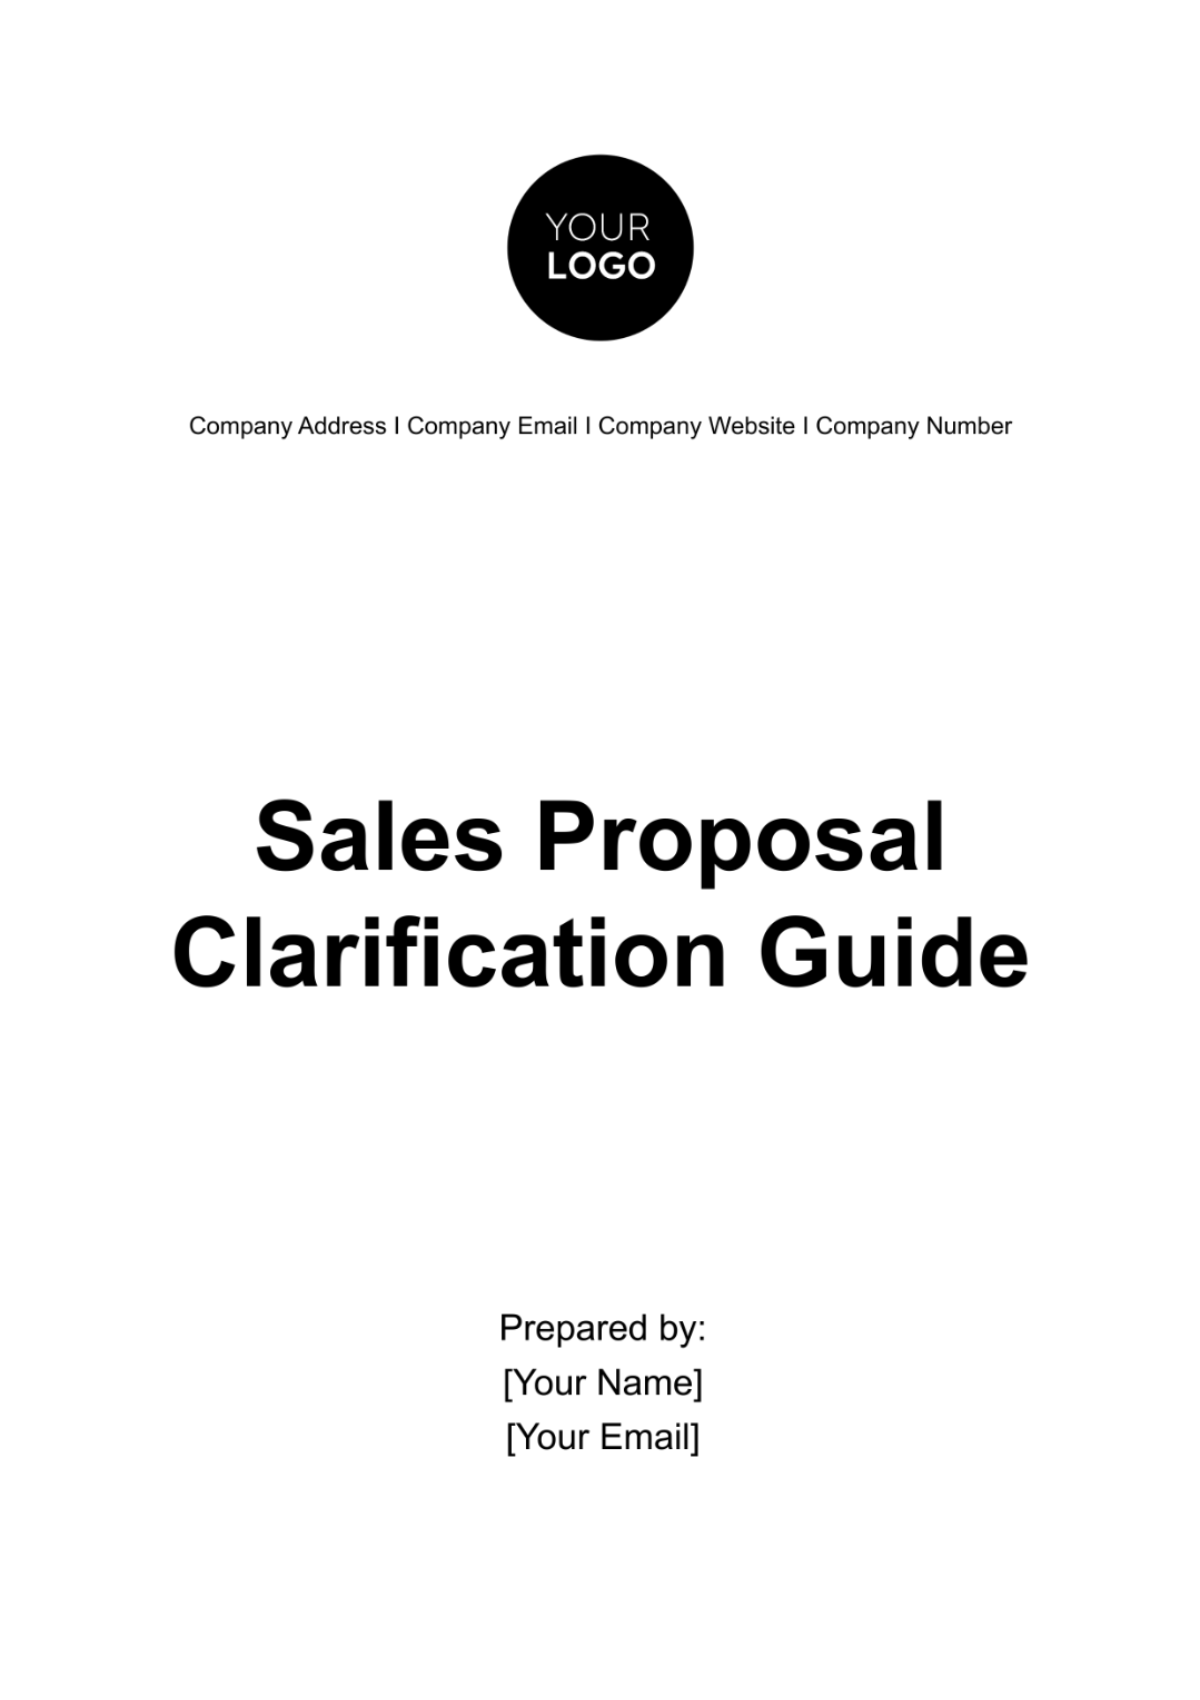 Sales Proposal Clarification Guide Template